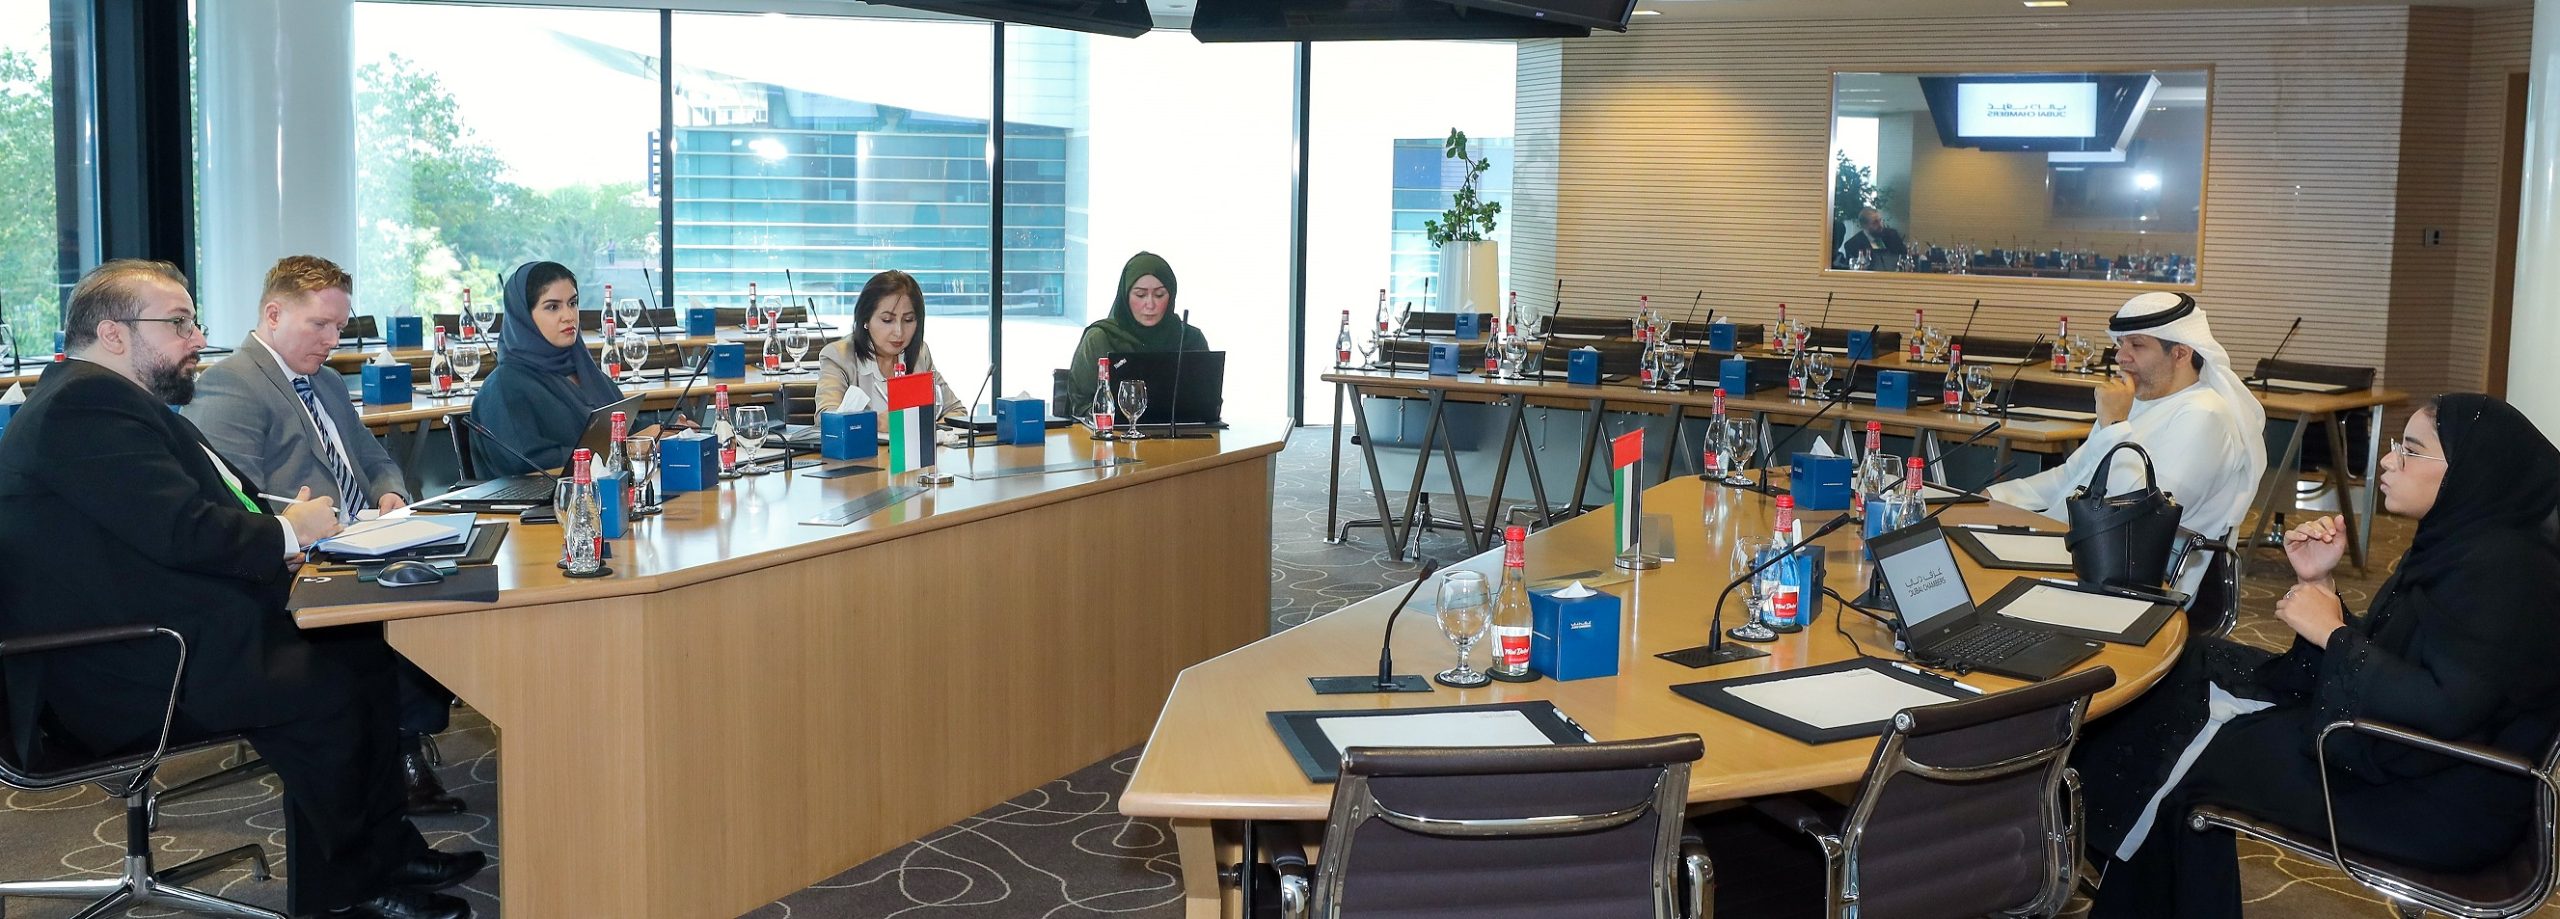 Dubai Chamber of Commerce discusses future of private notary office services and their positive impact on various business sectors